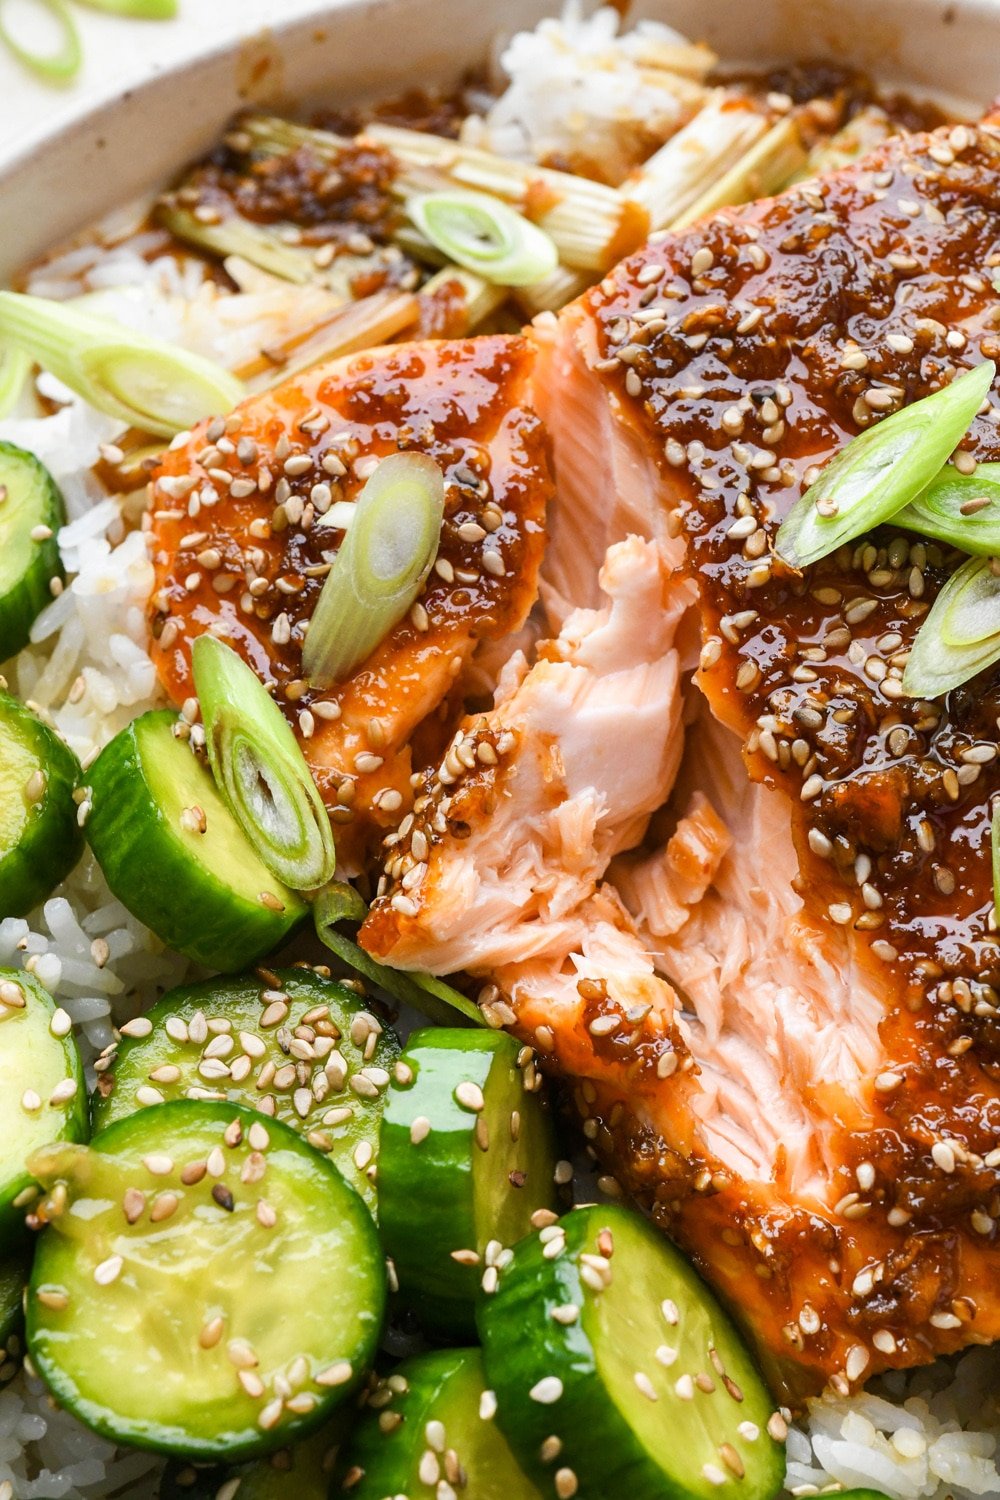 A close up of glazed garlic ginger salmon, the flesh flaked to show the perfectly cooked interior.